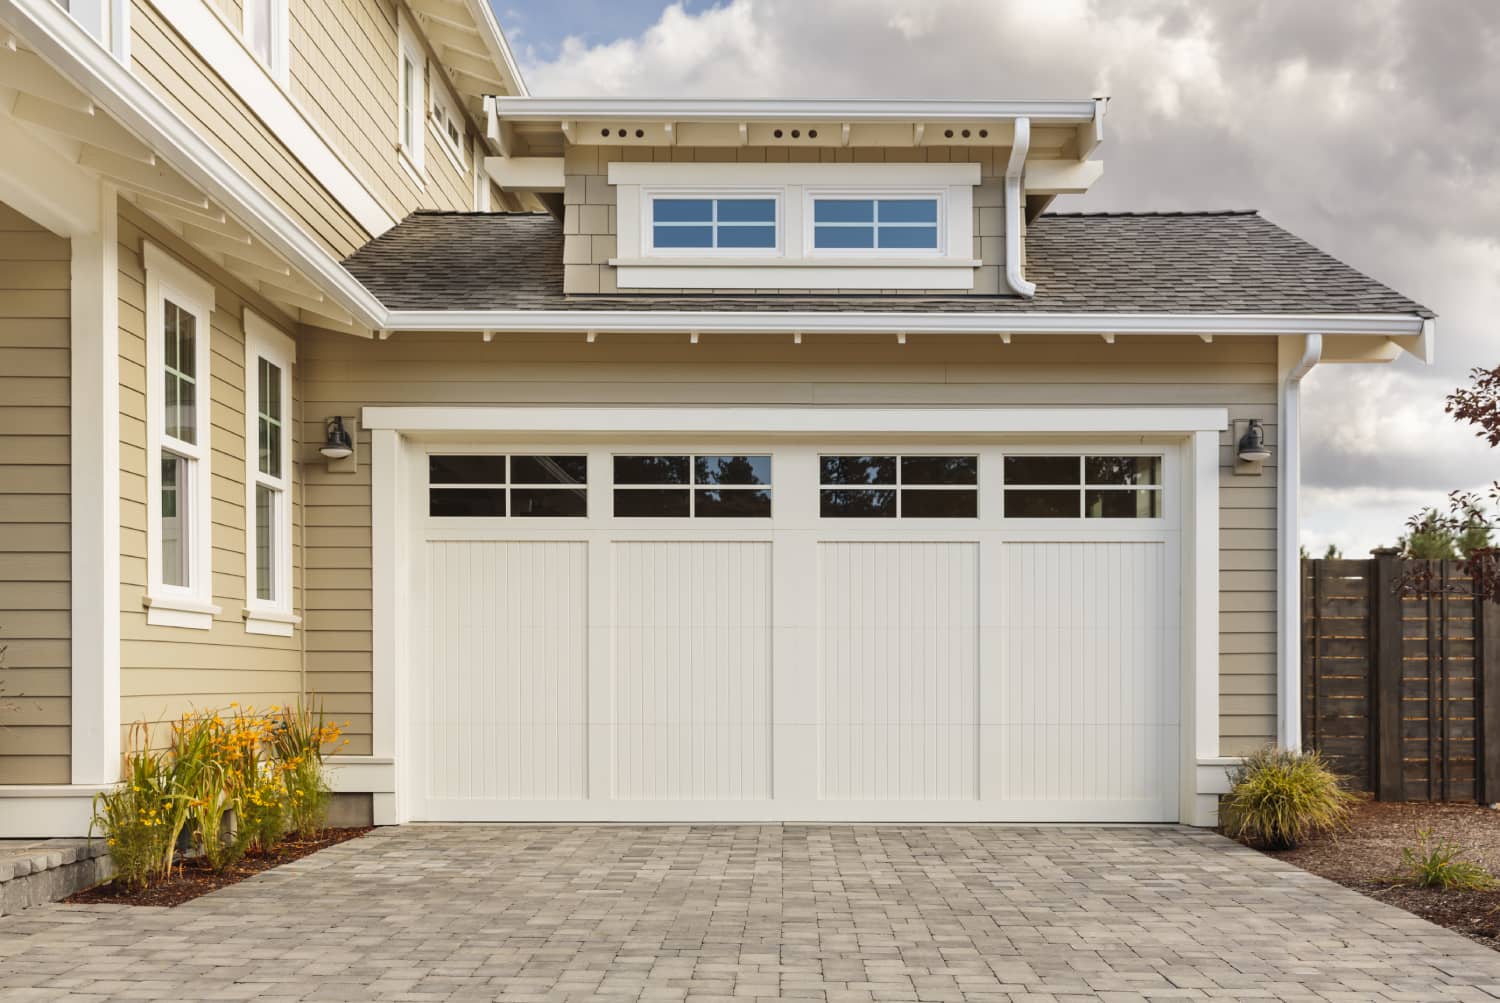 Is Damage to Garage Door Covered by Insurance